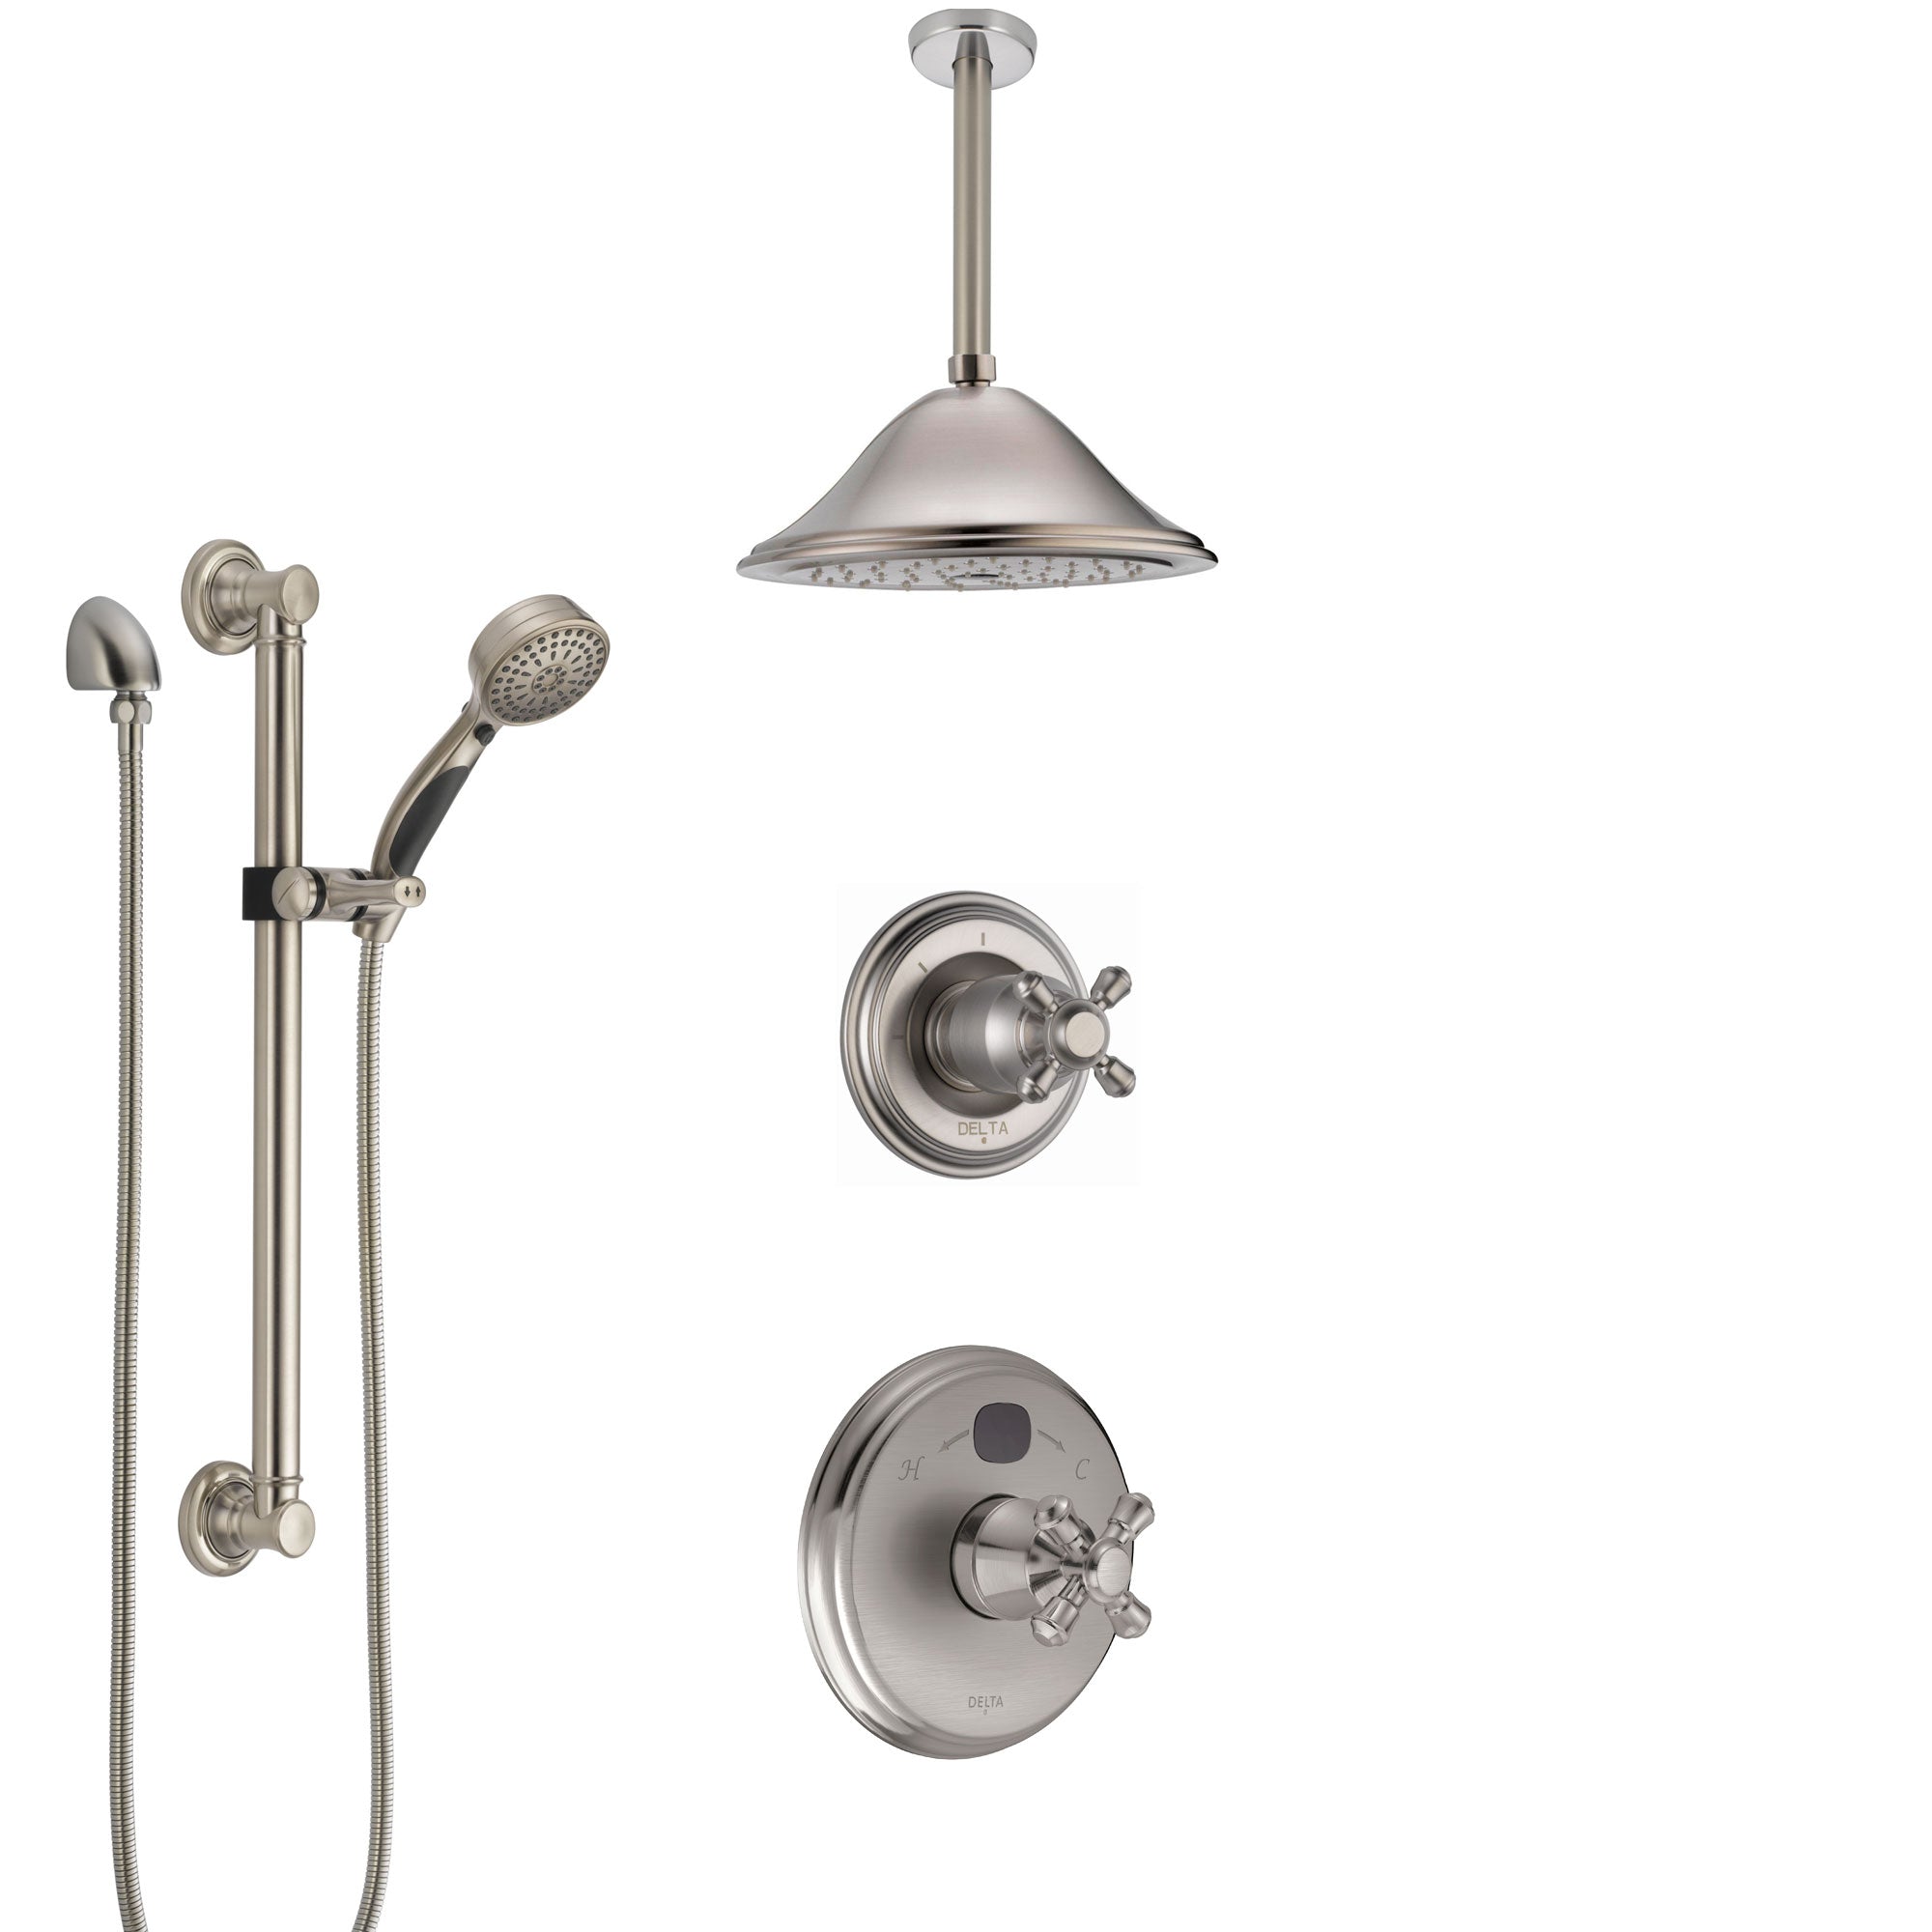 Delta Cassidy Stainless Steel Finish Shower System with Temp2O Control, Diverter, Ceiling Mount Showerhead, and Hand Shower with Grab Bar SS14004SS7